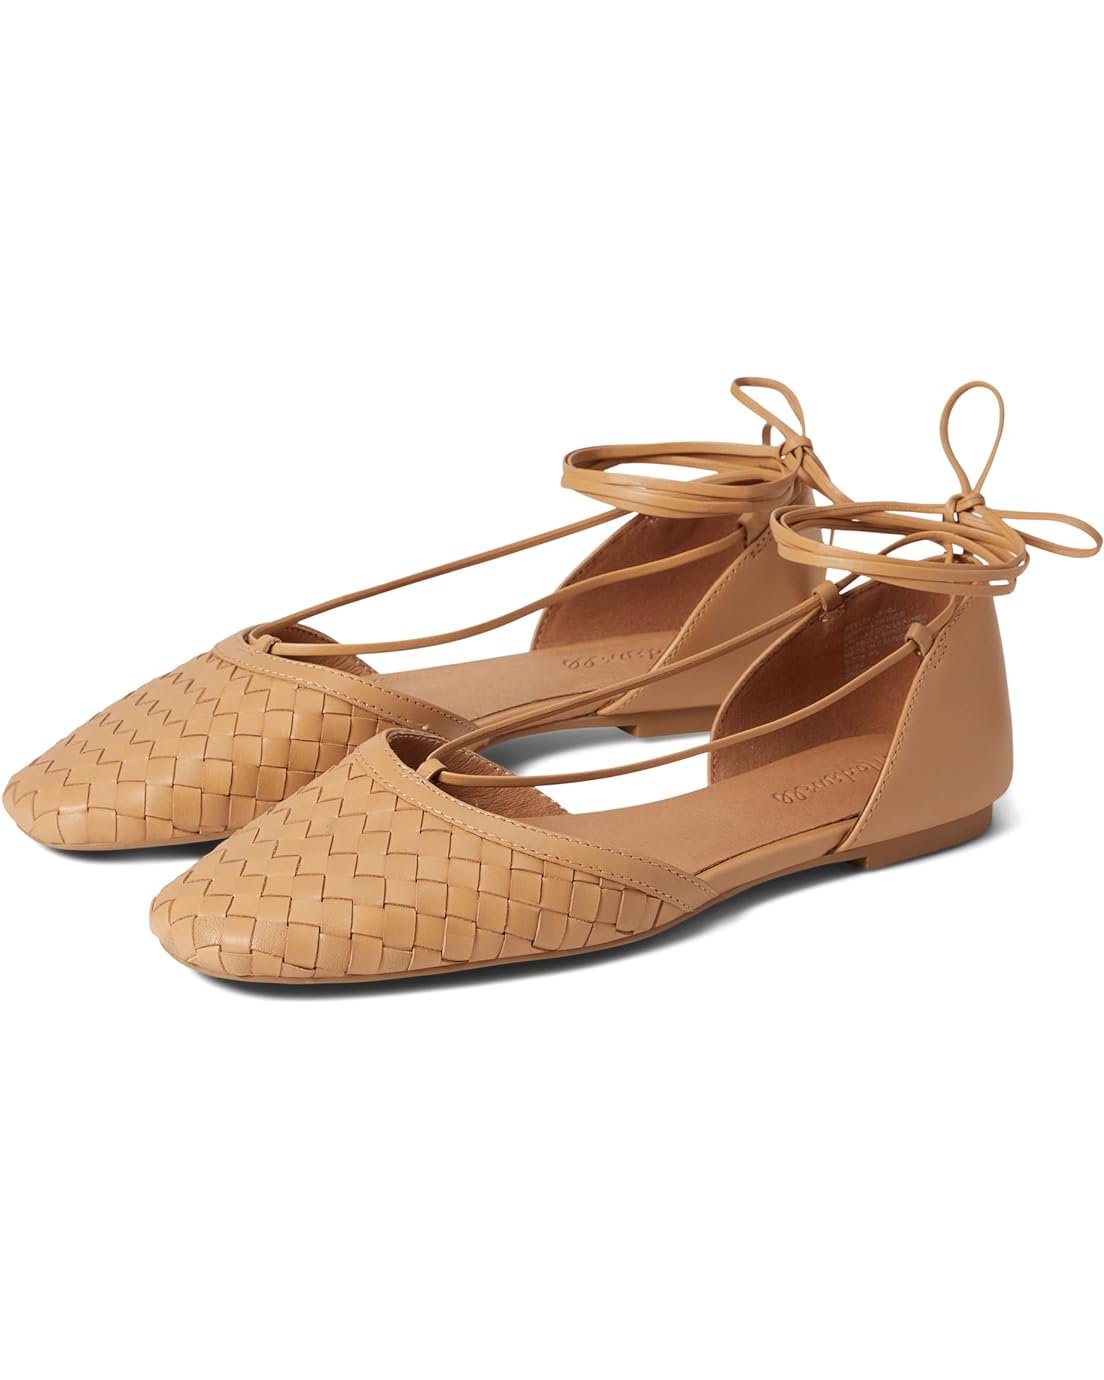 Madewell The Celina Lace-Up Flat in Woven Leather